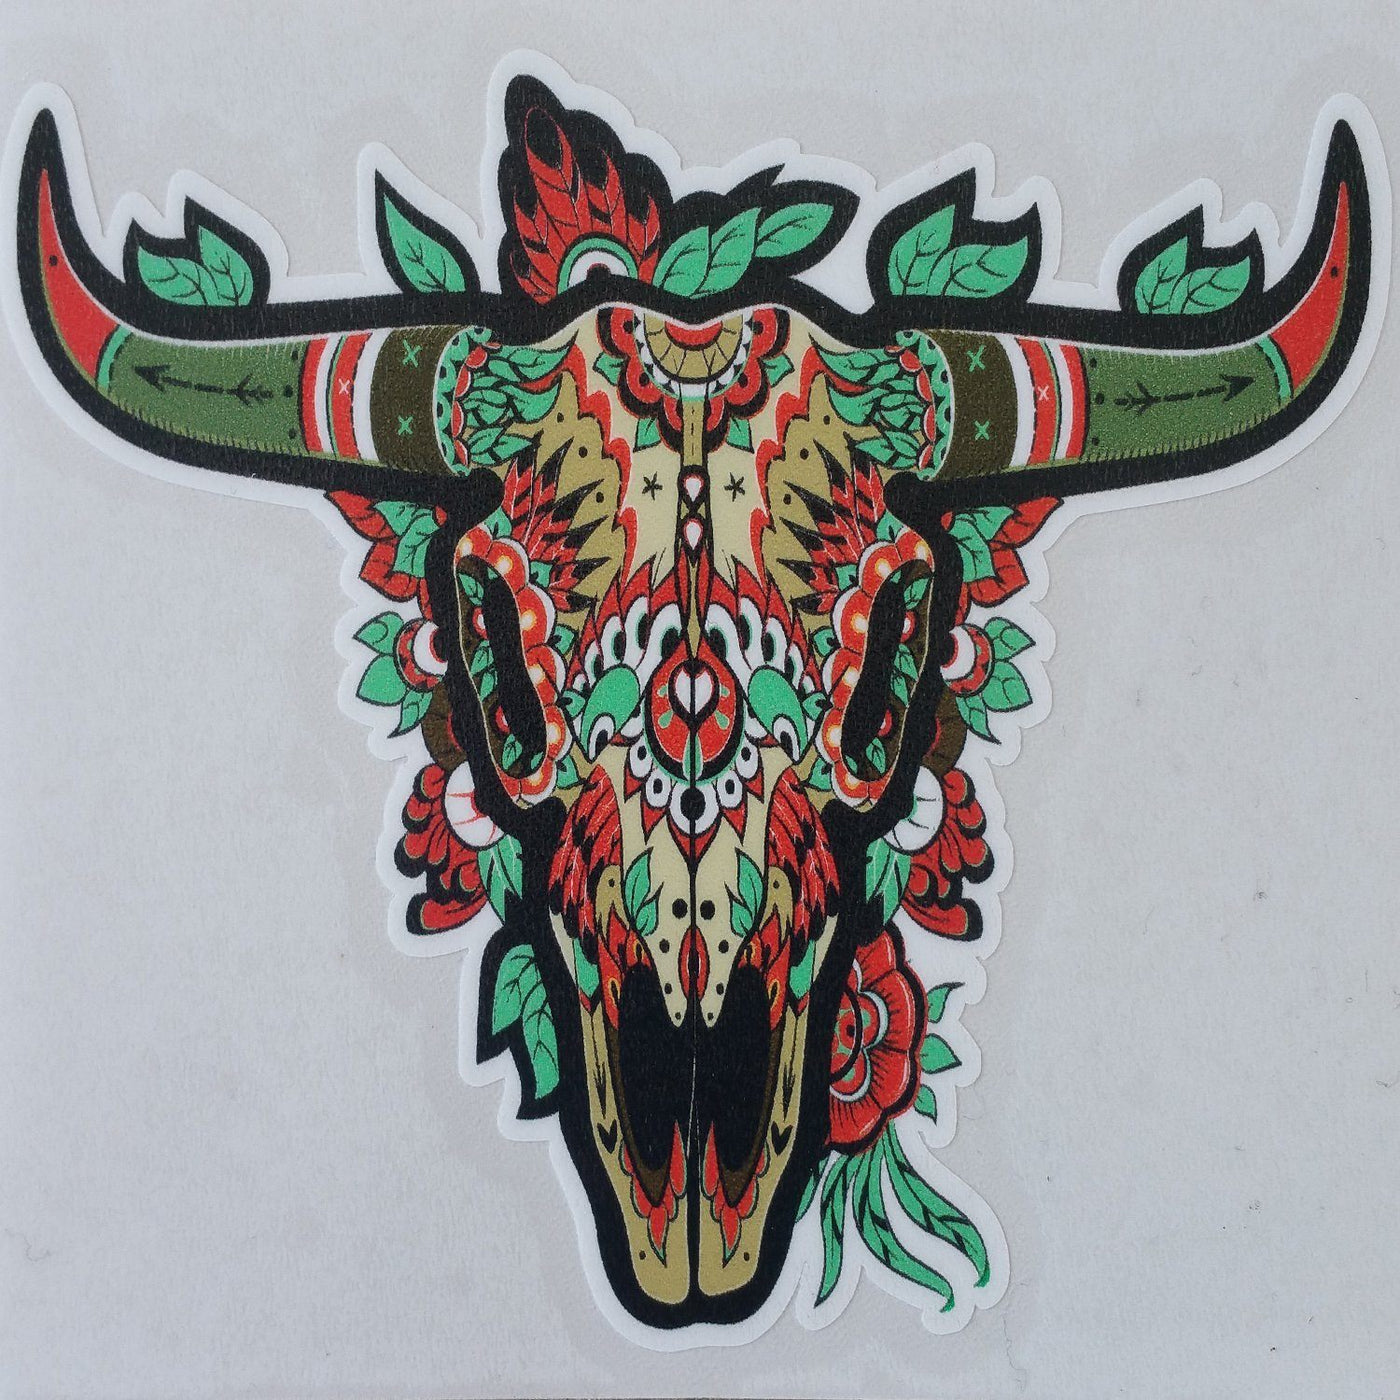 Bison "Buffalo" Stickers Accessories The Buffalo Wool Co. Decorated Bison skull - Large 